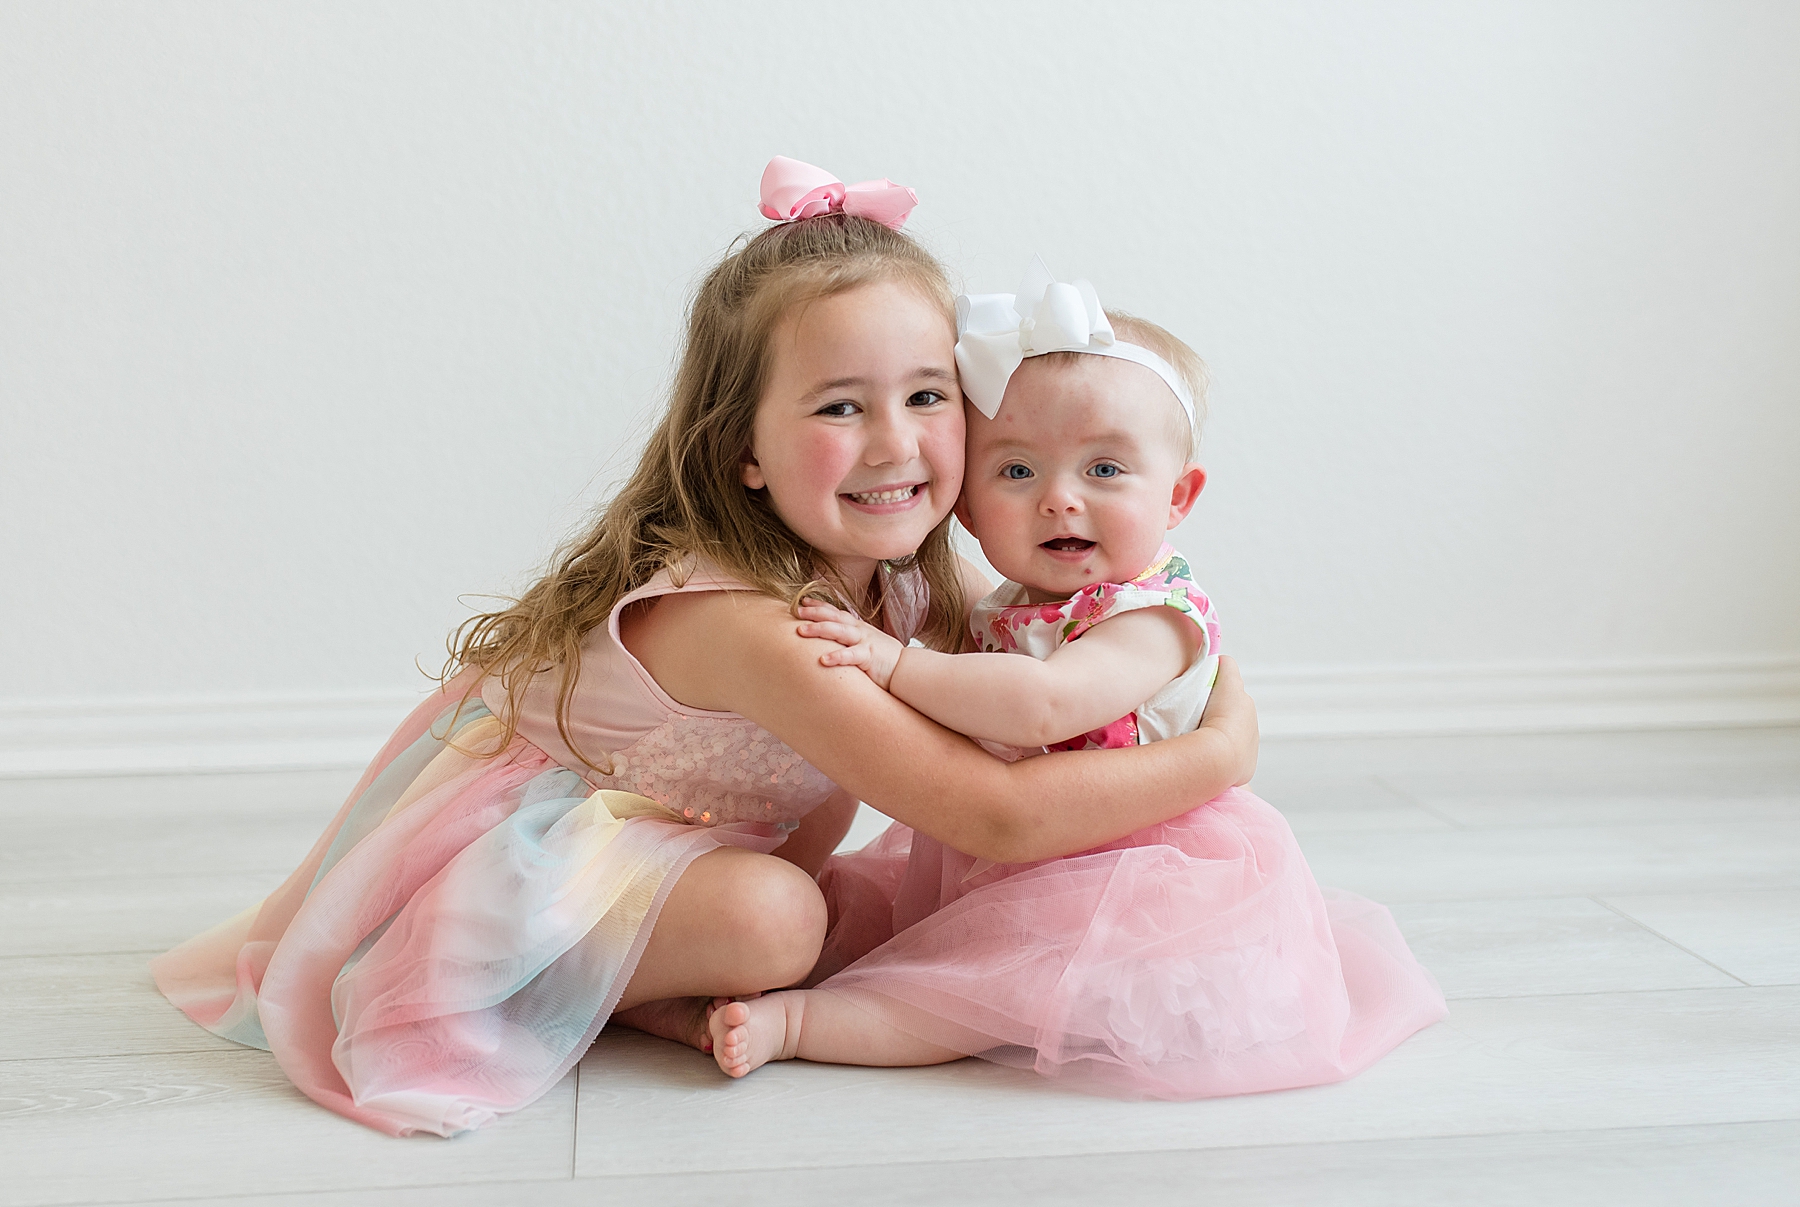 Baby girls first birthday cake smash session | Lindsey Dutton Photography | Dallas Area Family Photographer | studio first birthday photo session, pink first birthday inspiration, first birthday photo session decor ideas | via lindseyduttonphotography.com